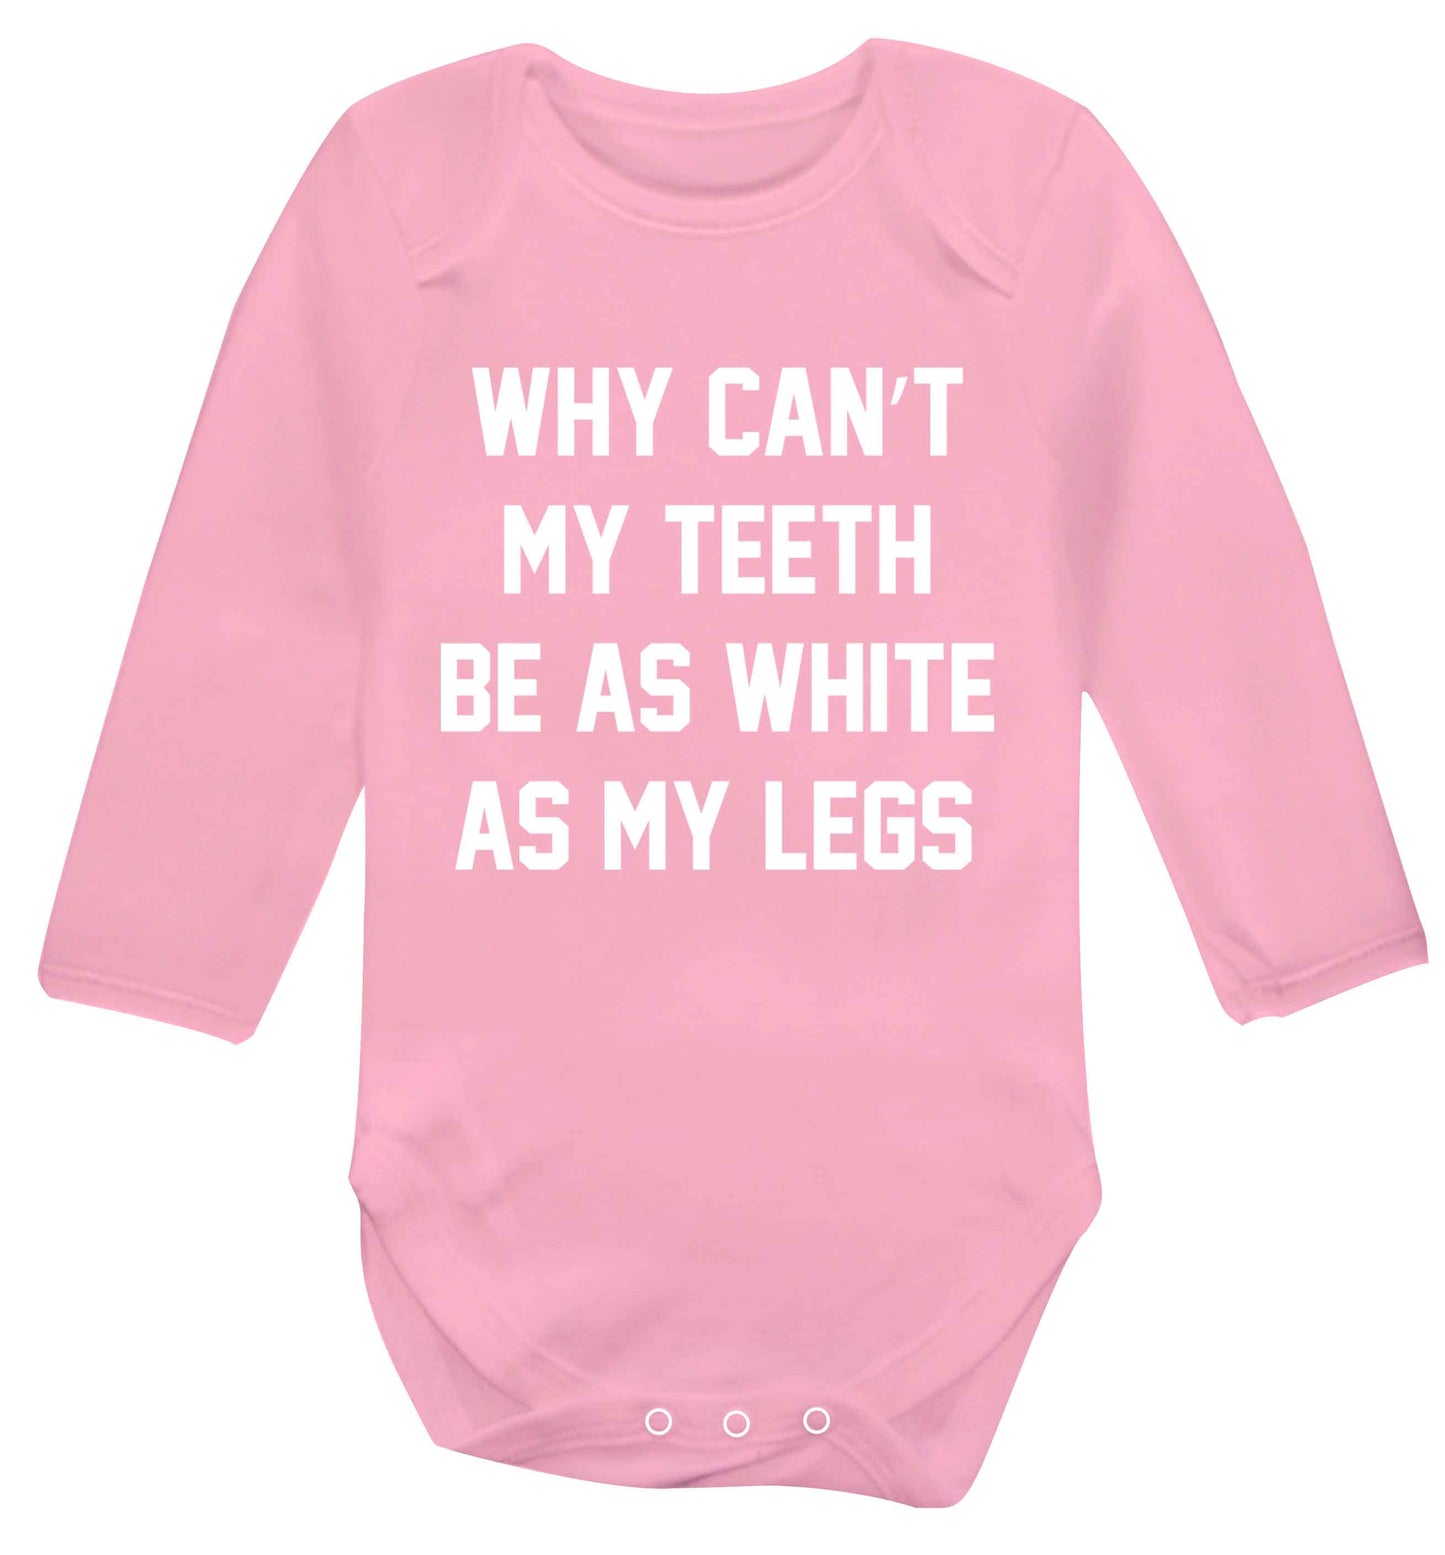 Why can't my teeth be as white as my legs Baby Vest long sleeved pale pink 6-12 months